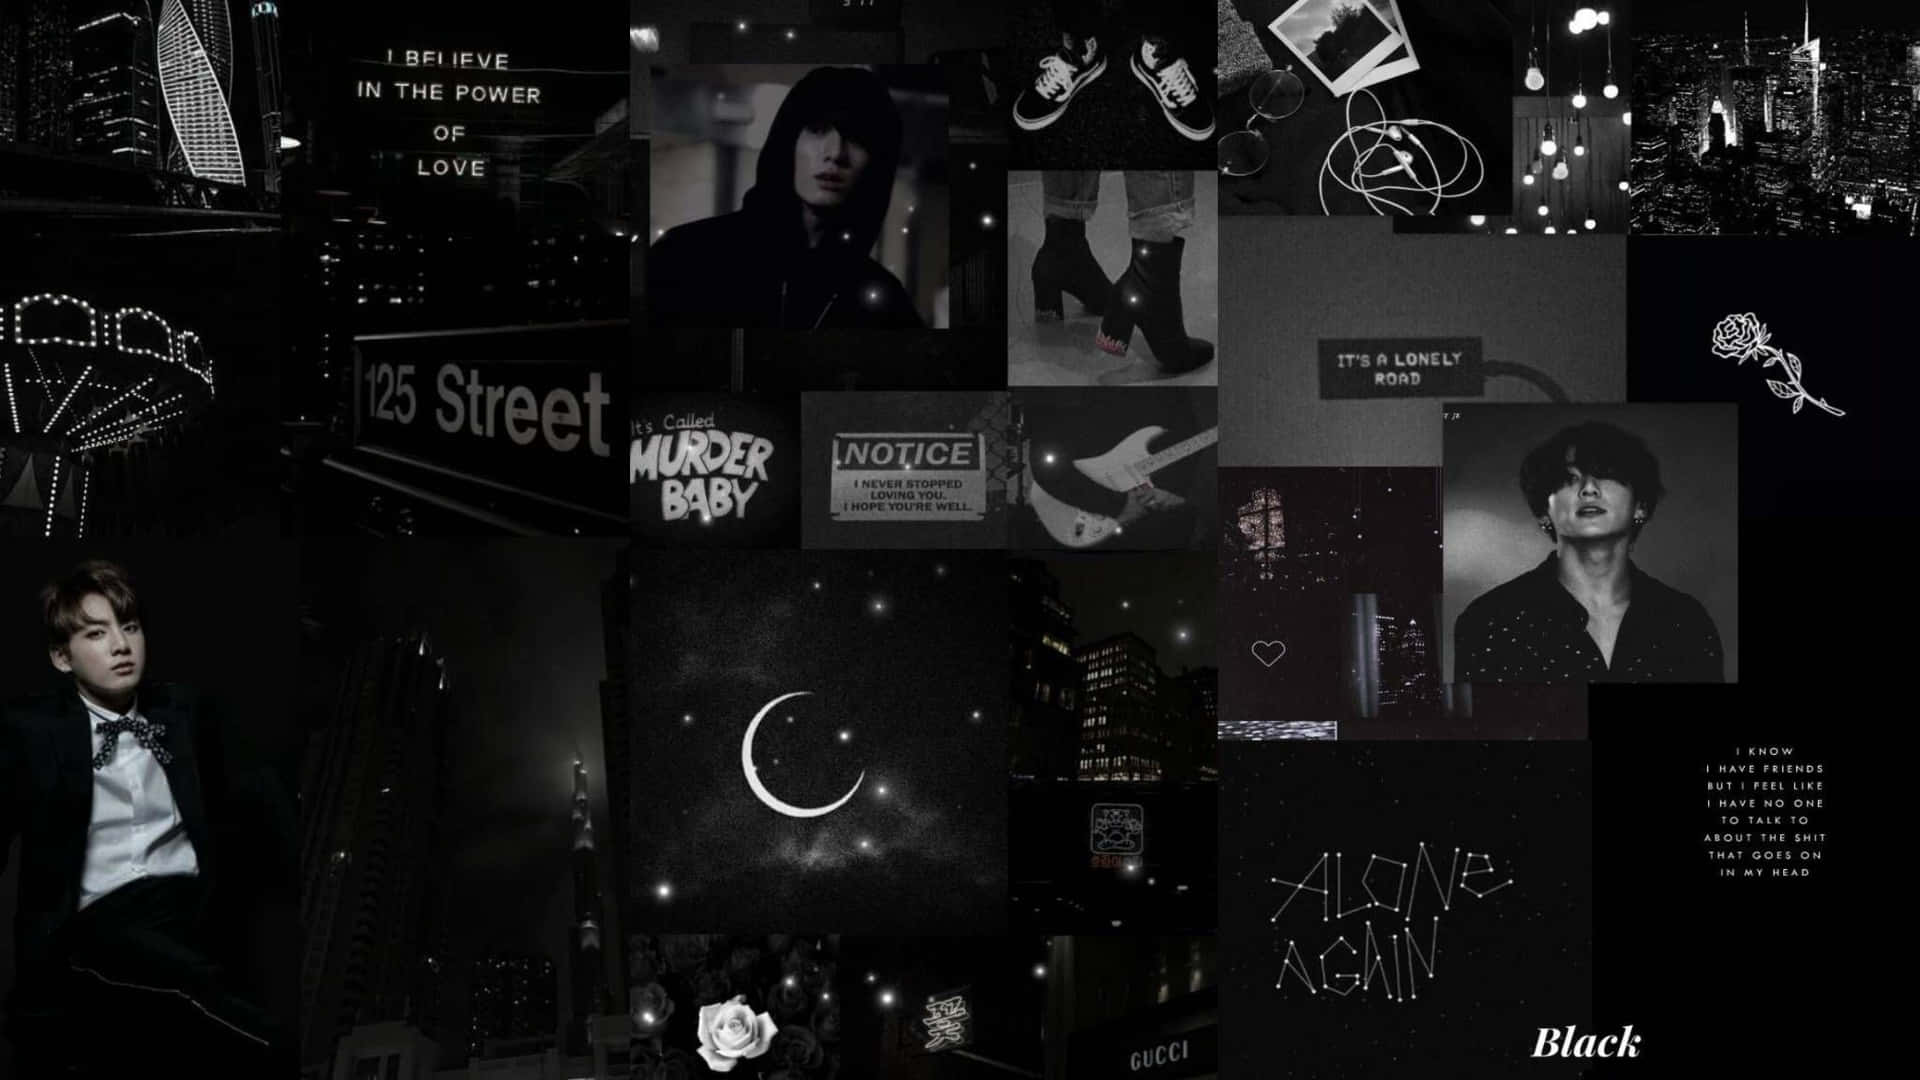 Download Korean Idols Collage Black Aesthetic Background | Wallpapers.com